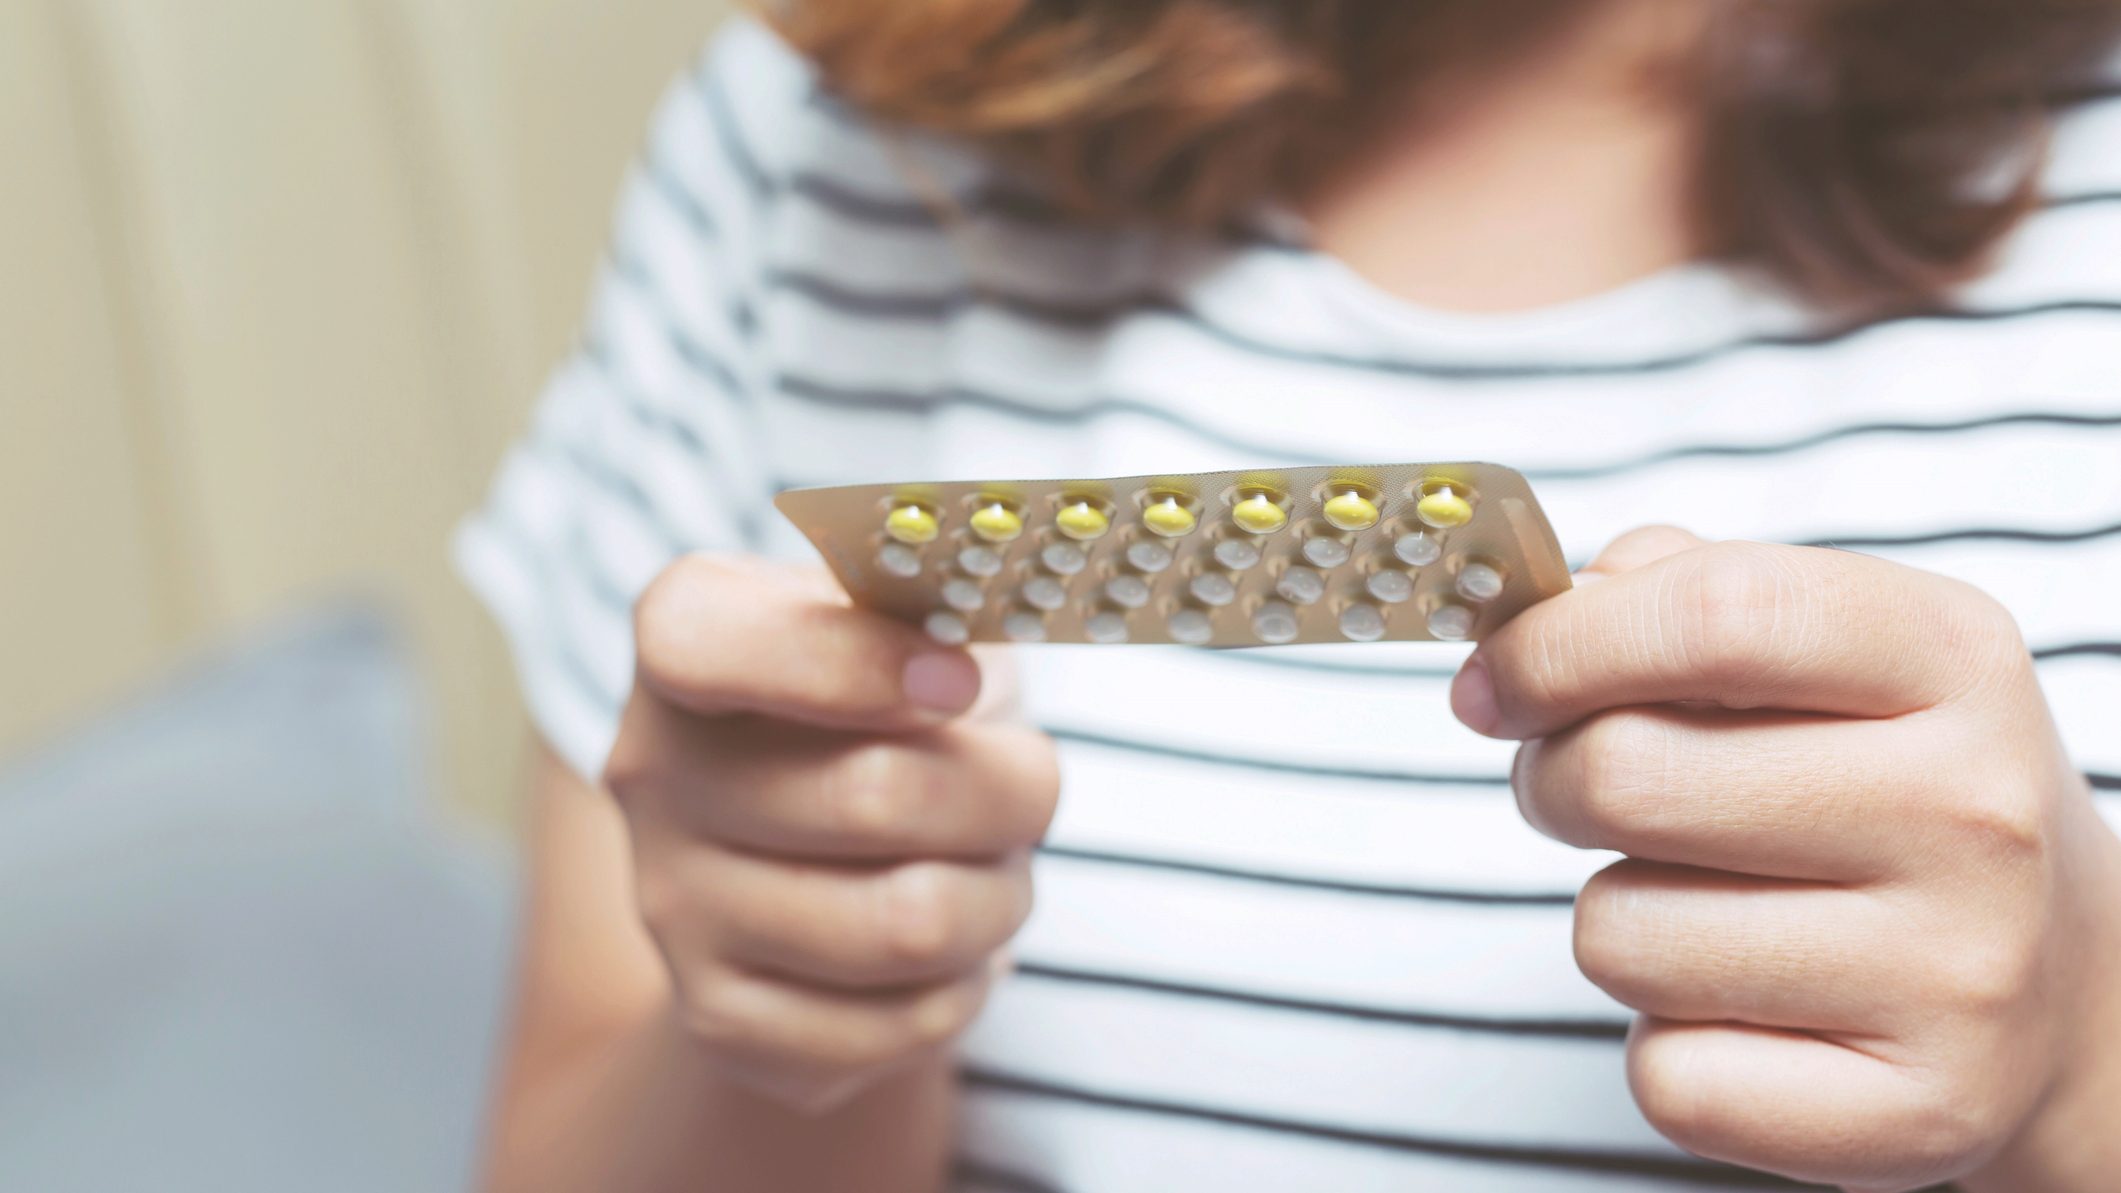 Birth control out of reach for low-income women, suggests study